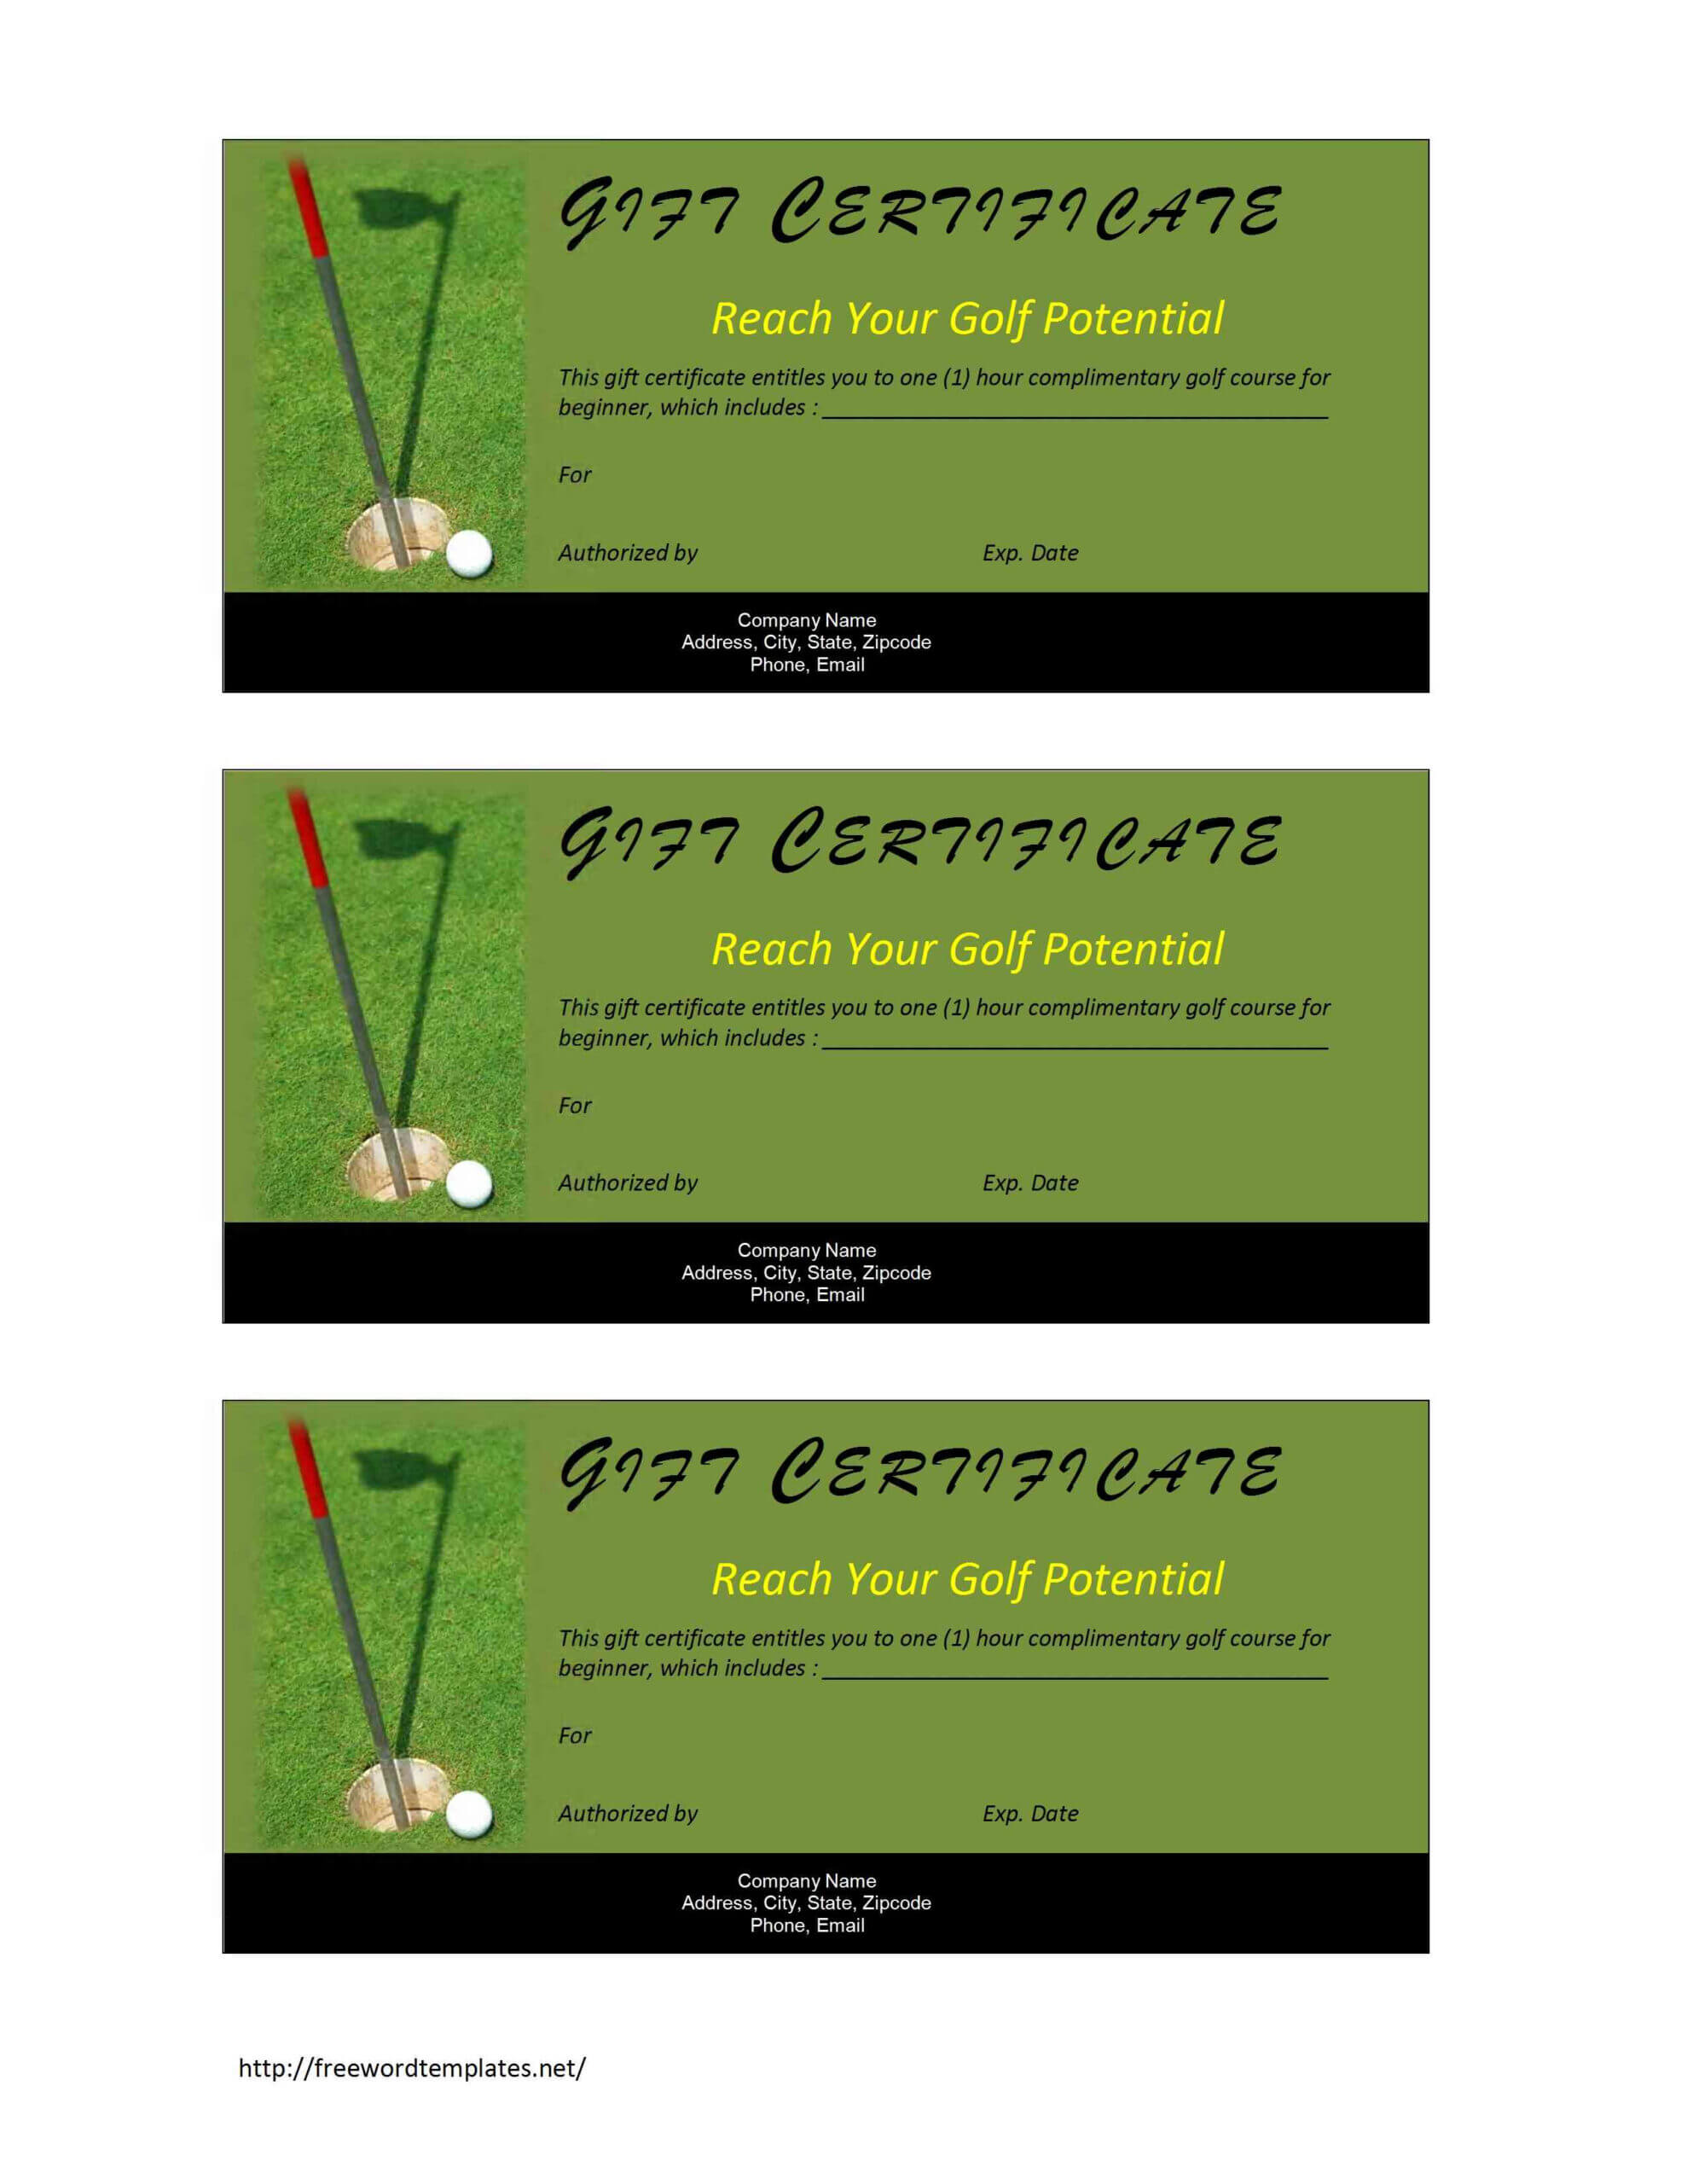 Gift Certificate Template Microsoft Word | Builder Resumes For Golf Certificate Templates For Word